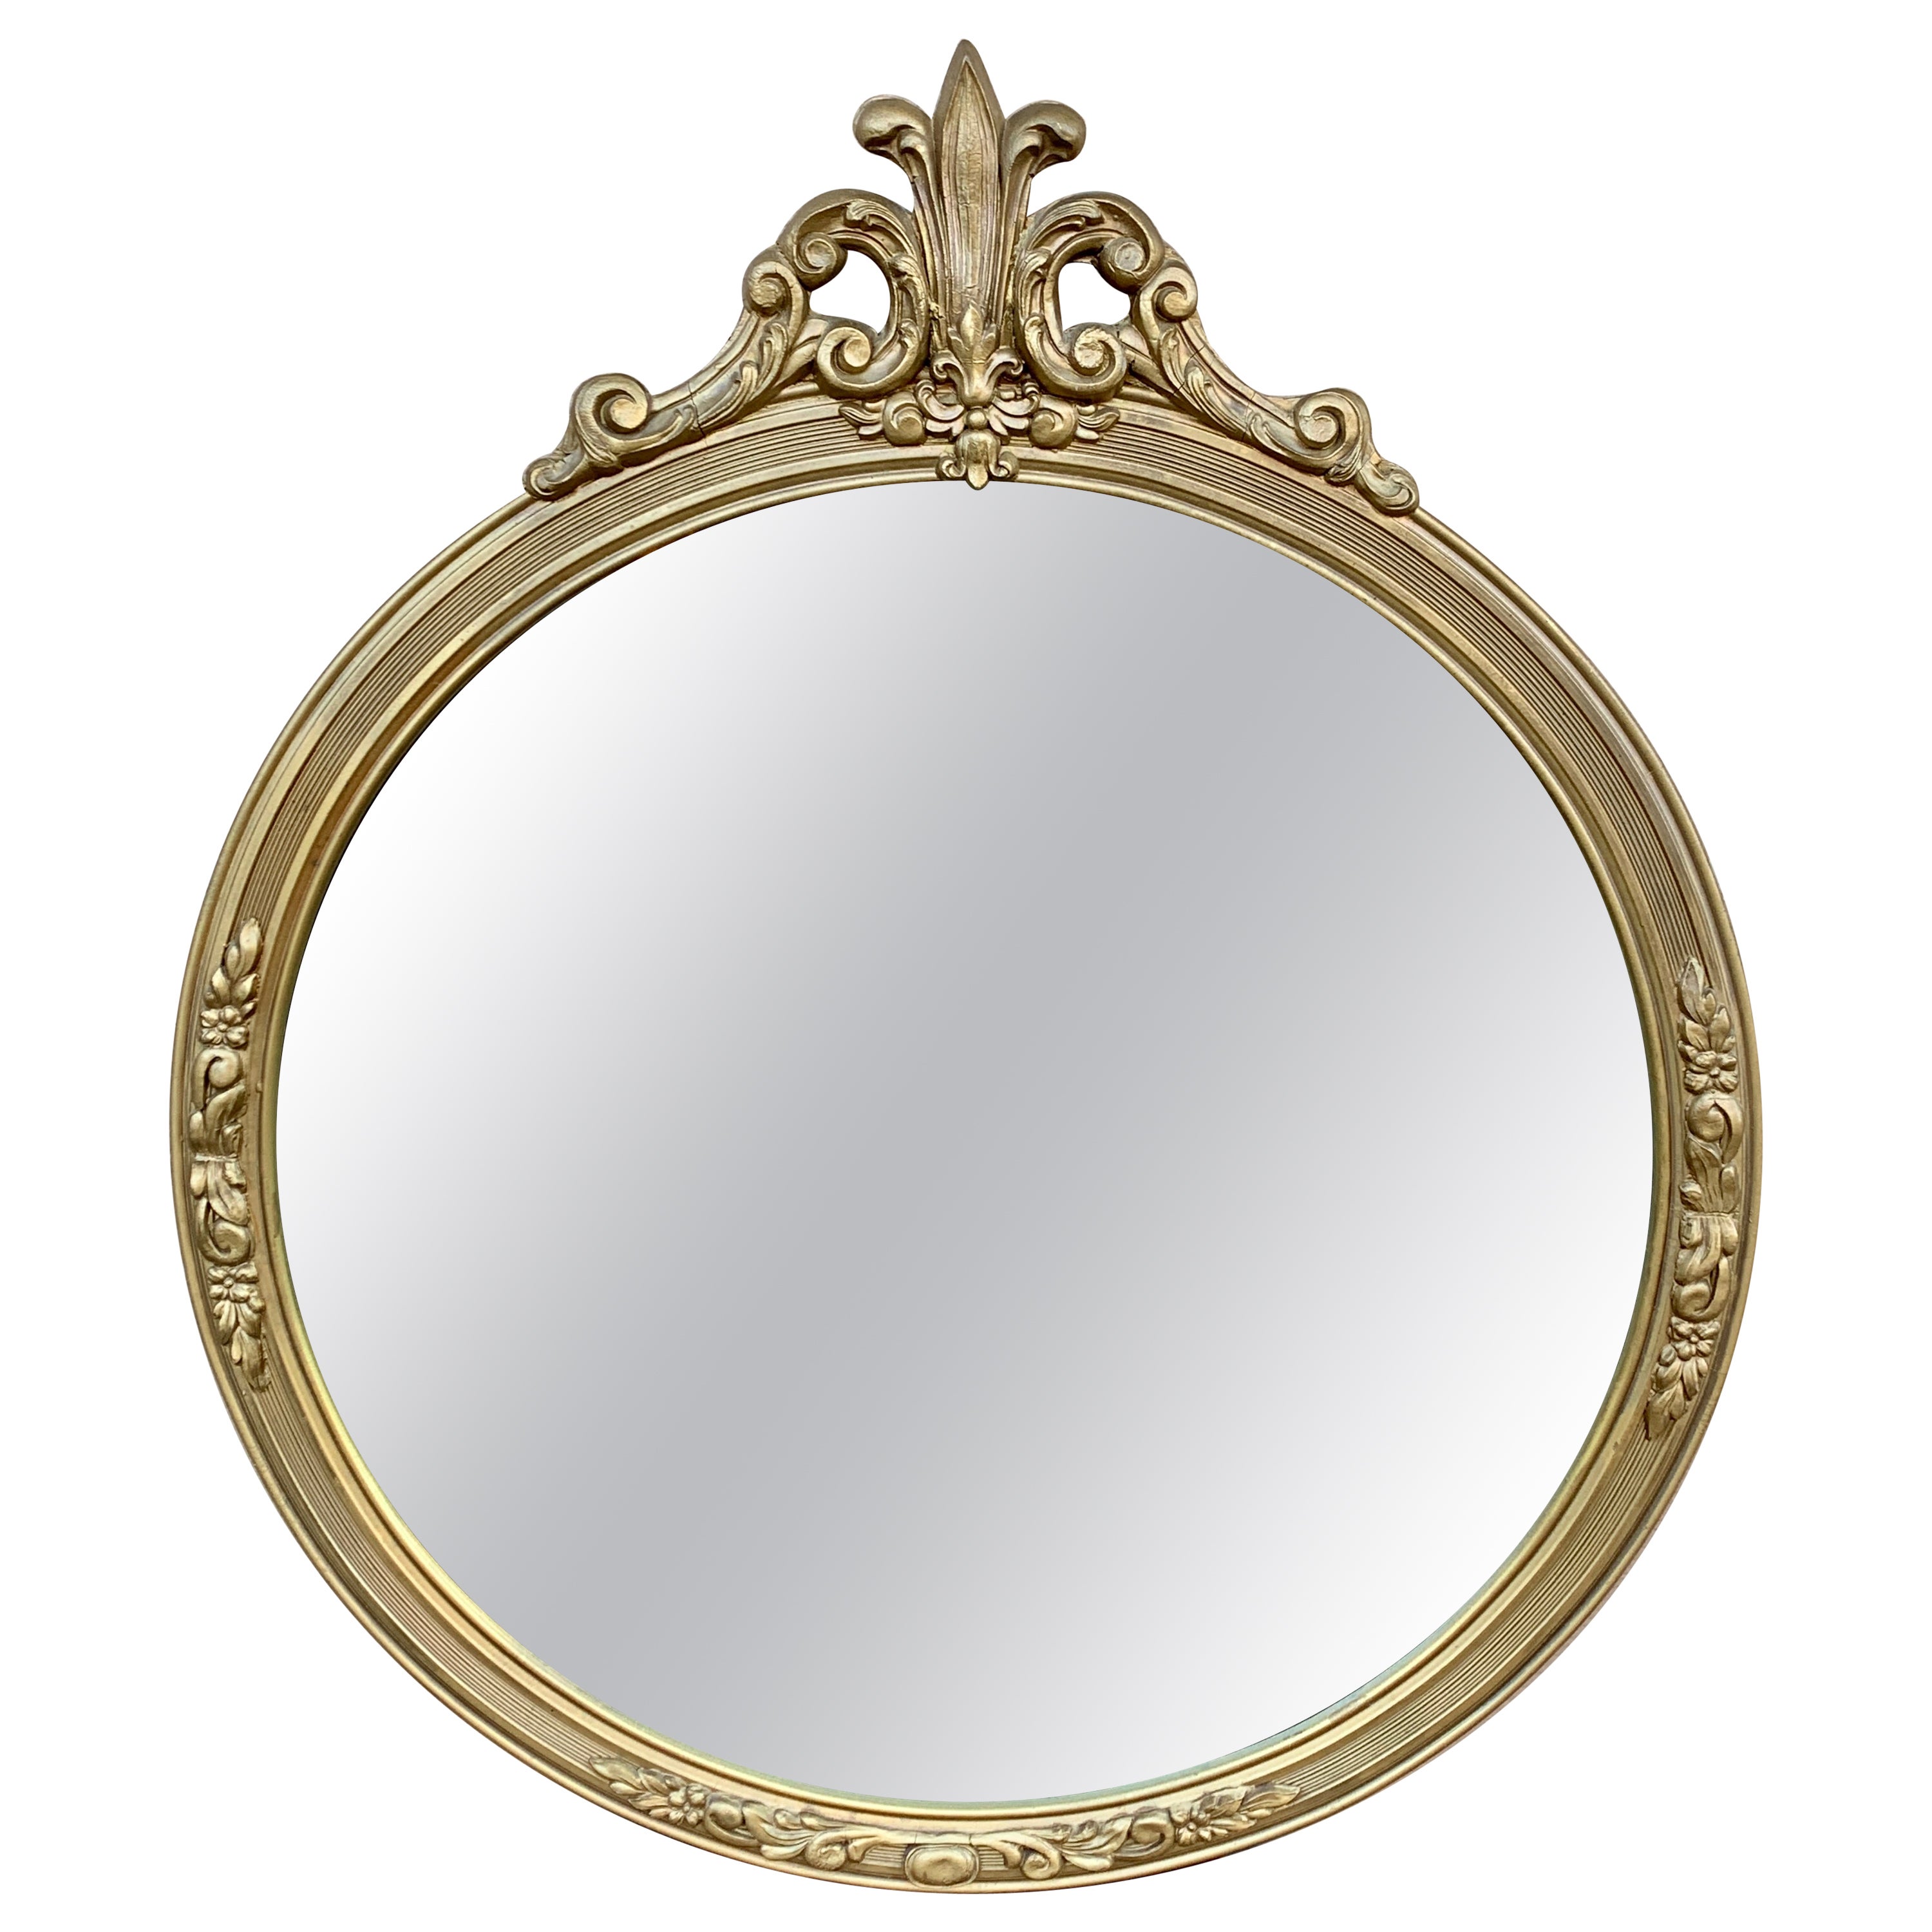 Antique French Provincial Round Giltwood Mirror, Circa 1920s For Sale